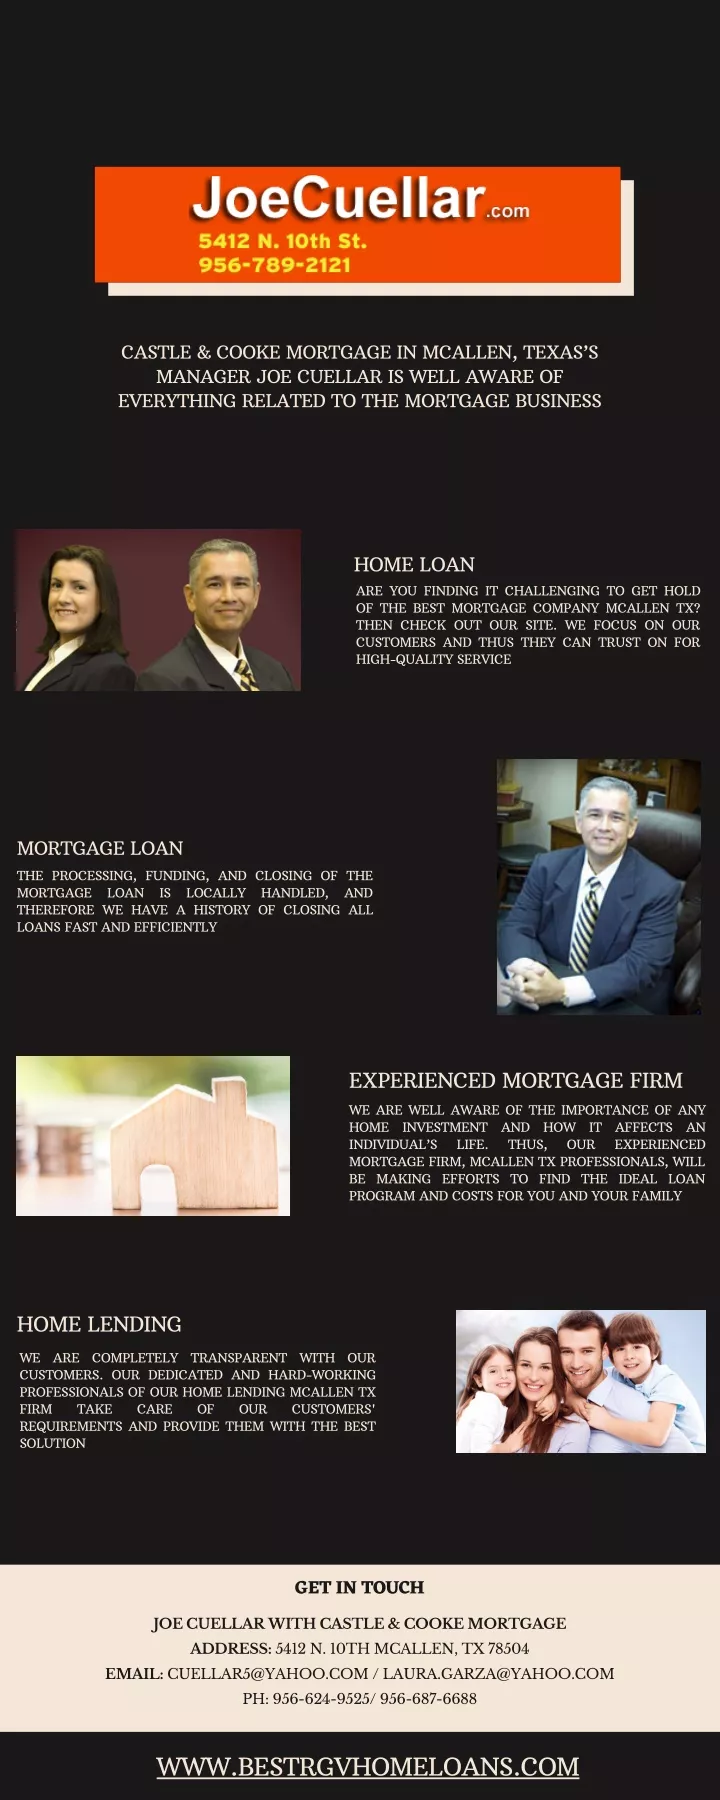 castle cooke mortgage in mcallen texas s manager